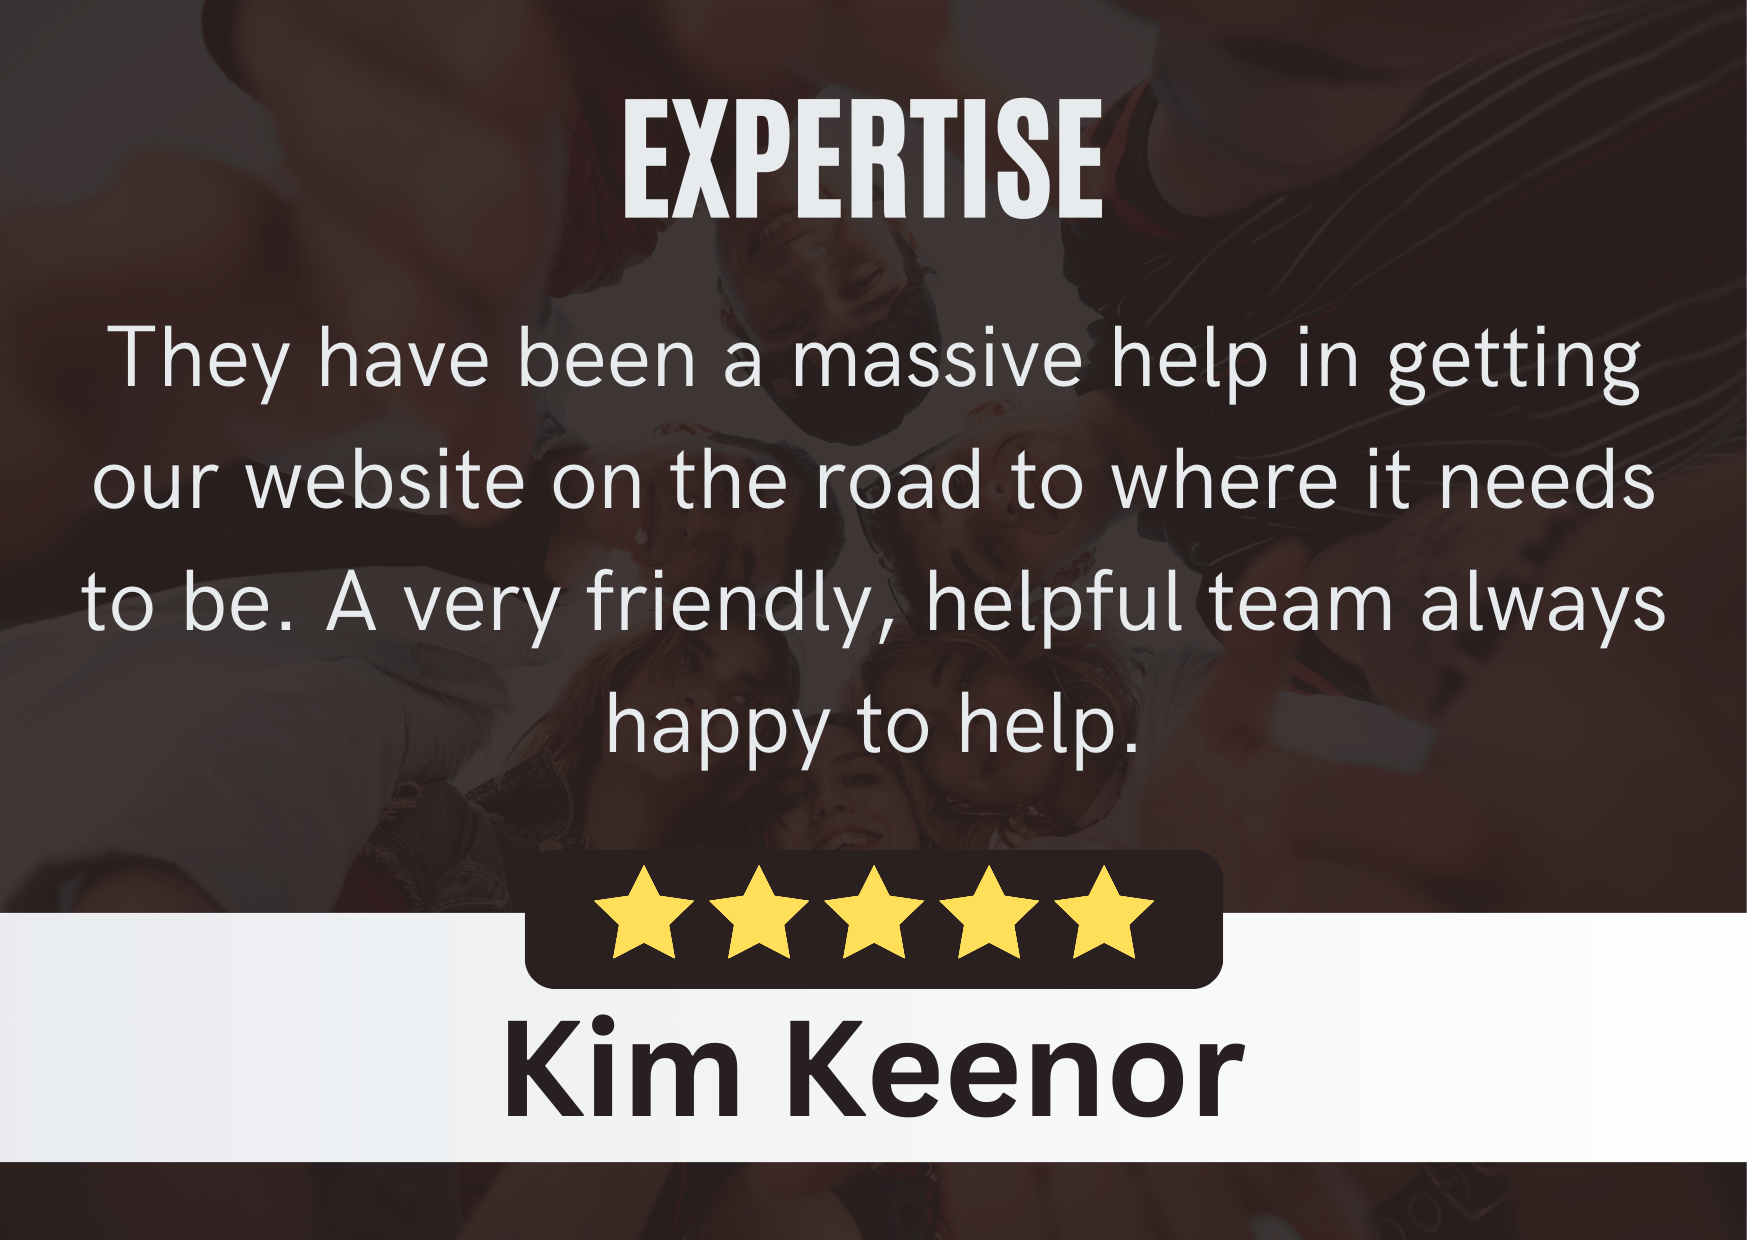 Kim Keenor - Edworthy Media Review | SEO Services Exeter. Review Content: They have been a massive help in getting our website on the road to where it needs to be. A very friendly, helpful team always happy to help.